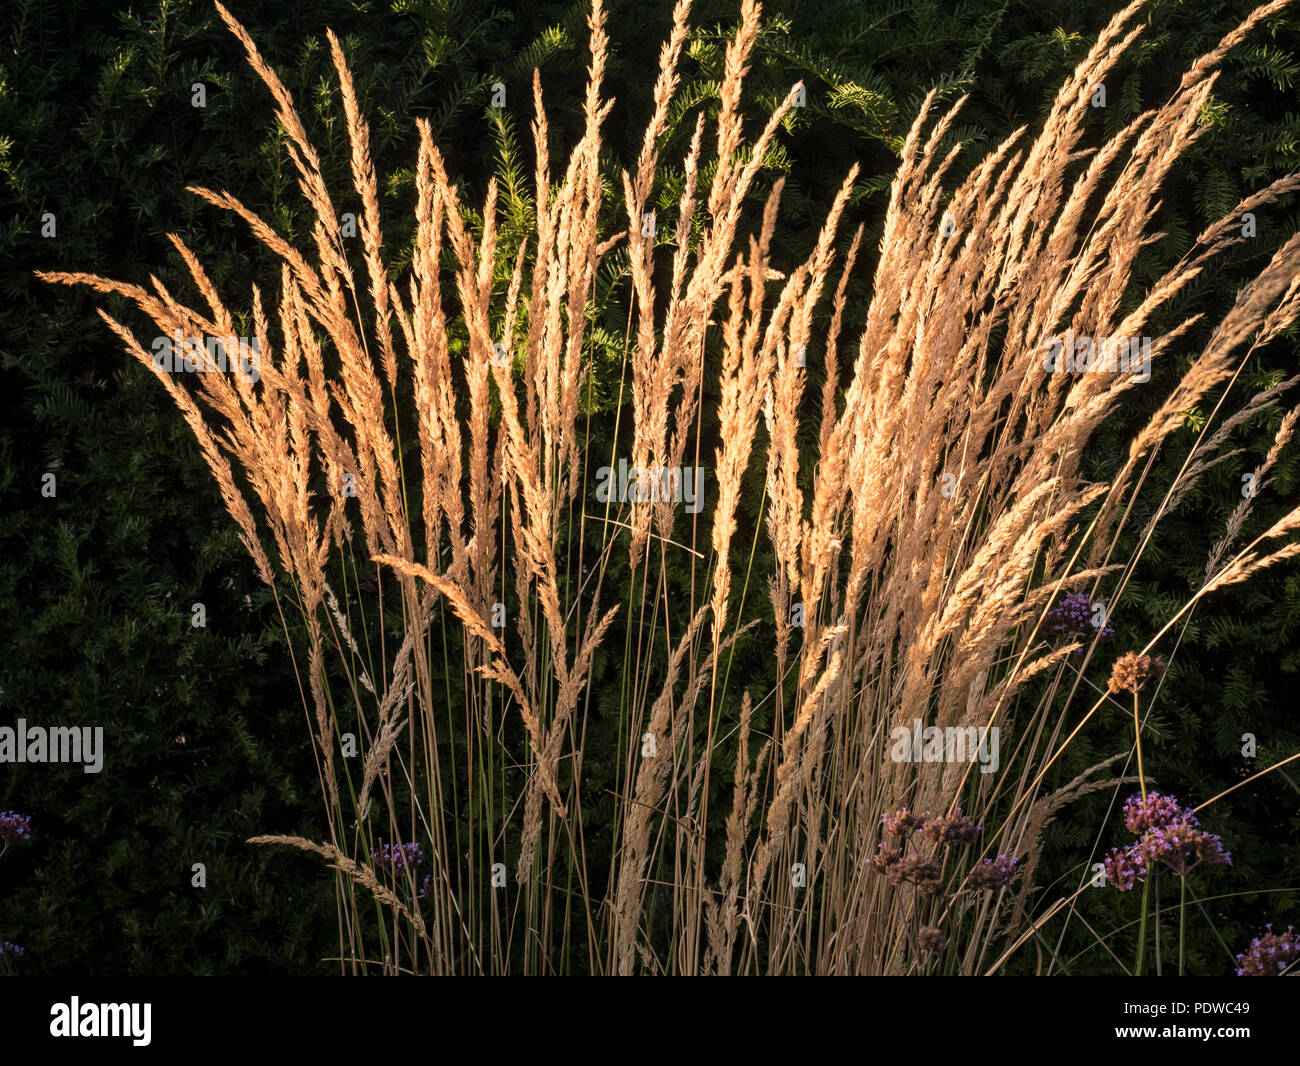 Architectural planting of grasses and drought resistant plants Stock Photo